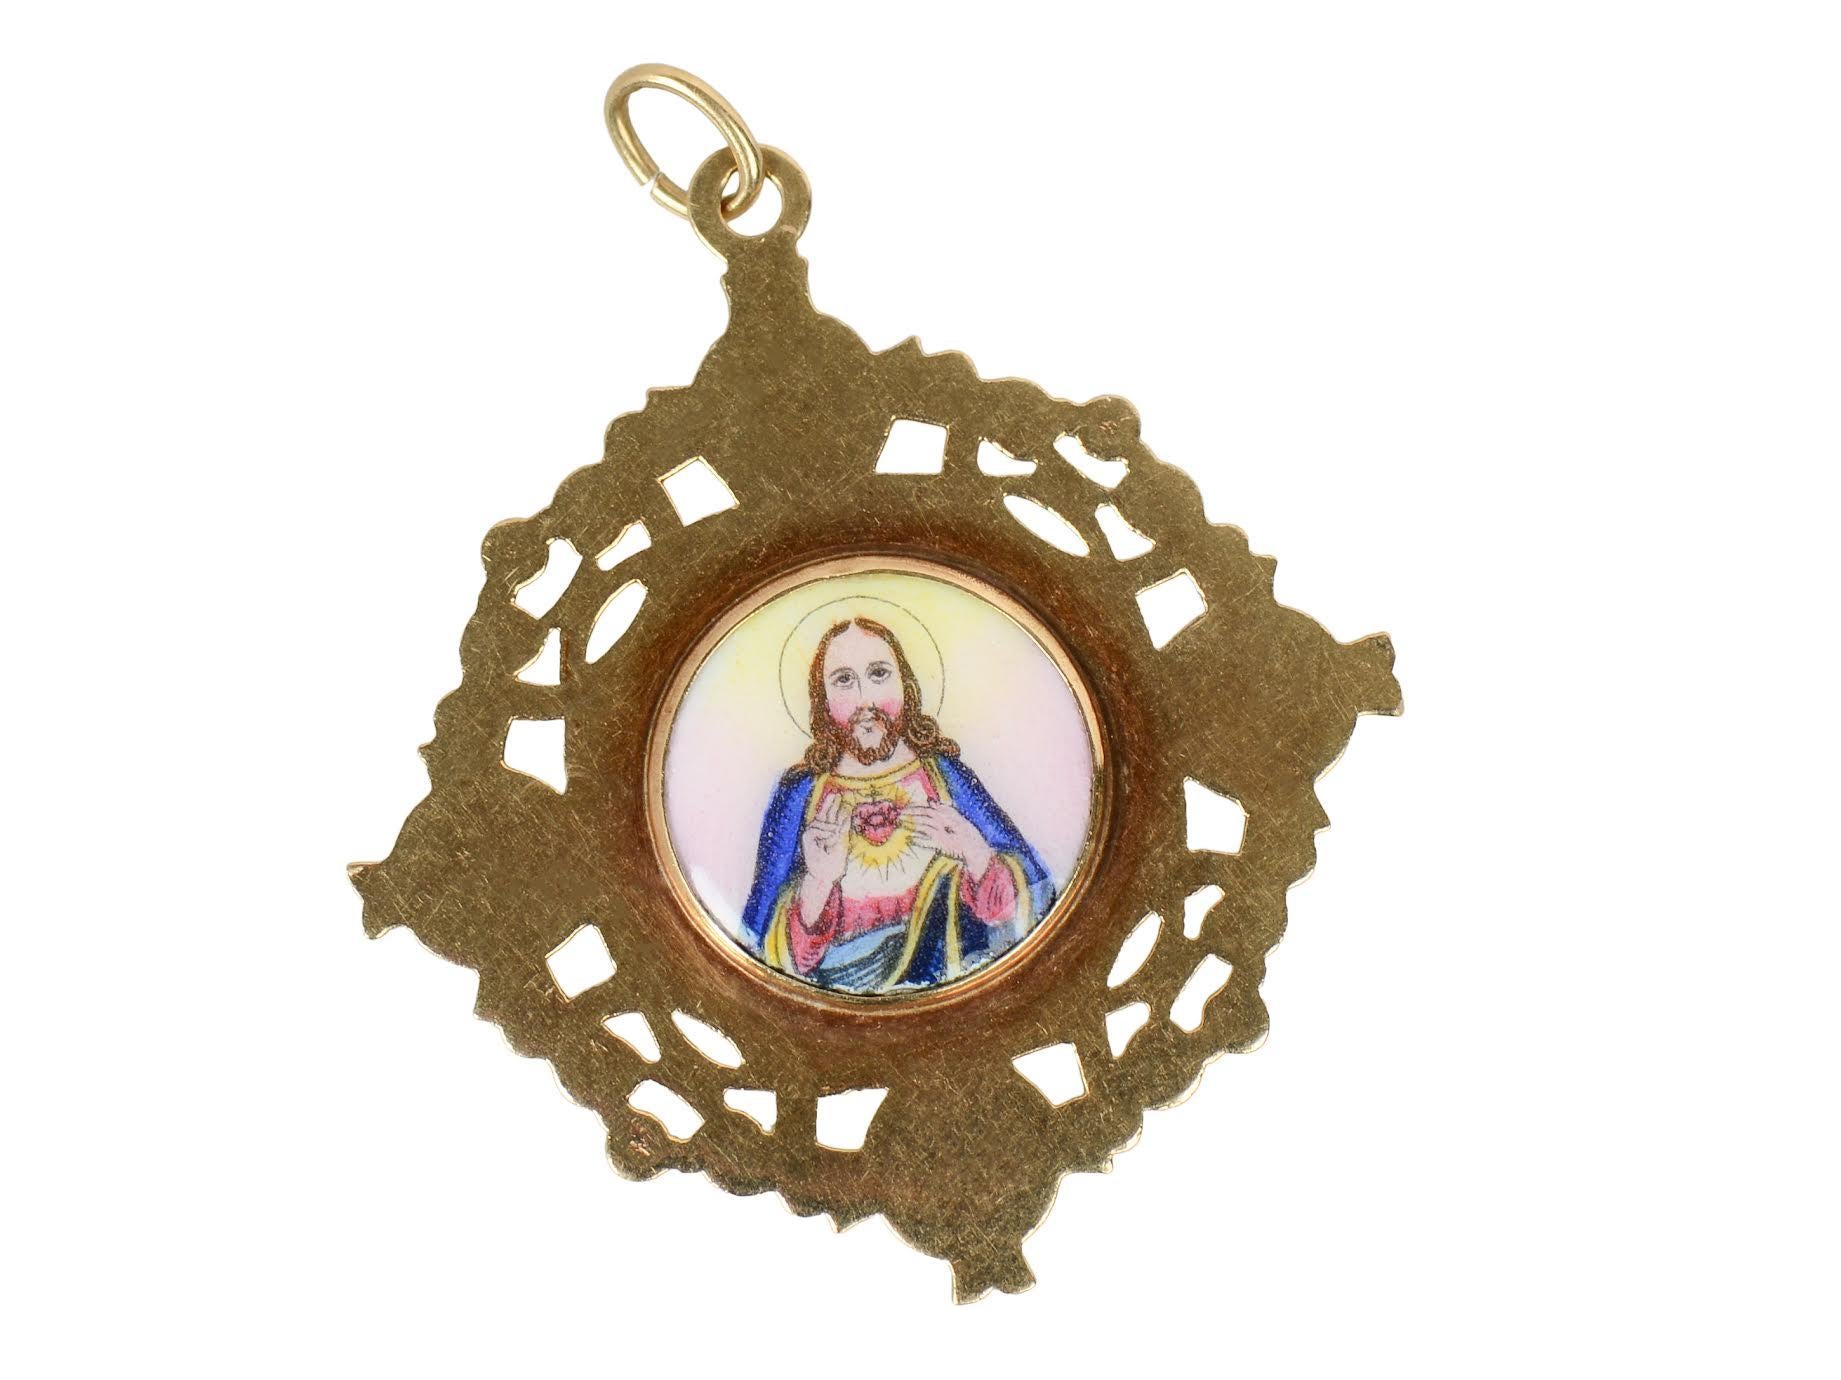 Retro Gold and Enamel Religious Medal of Jesus and Mary (#2077dbs)
An intricate religious medal in enamel and 10 kt Gold shows Mary holding baby Jesus painted on one side and Jesus on the reverse. Mary wears a golden crown. There are two angels at